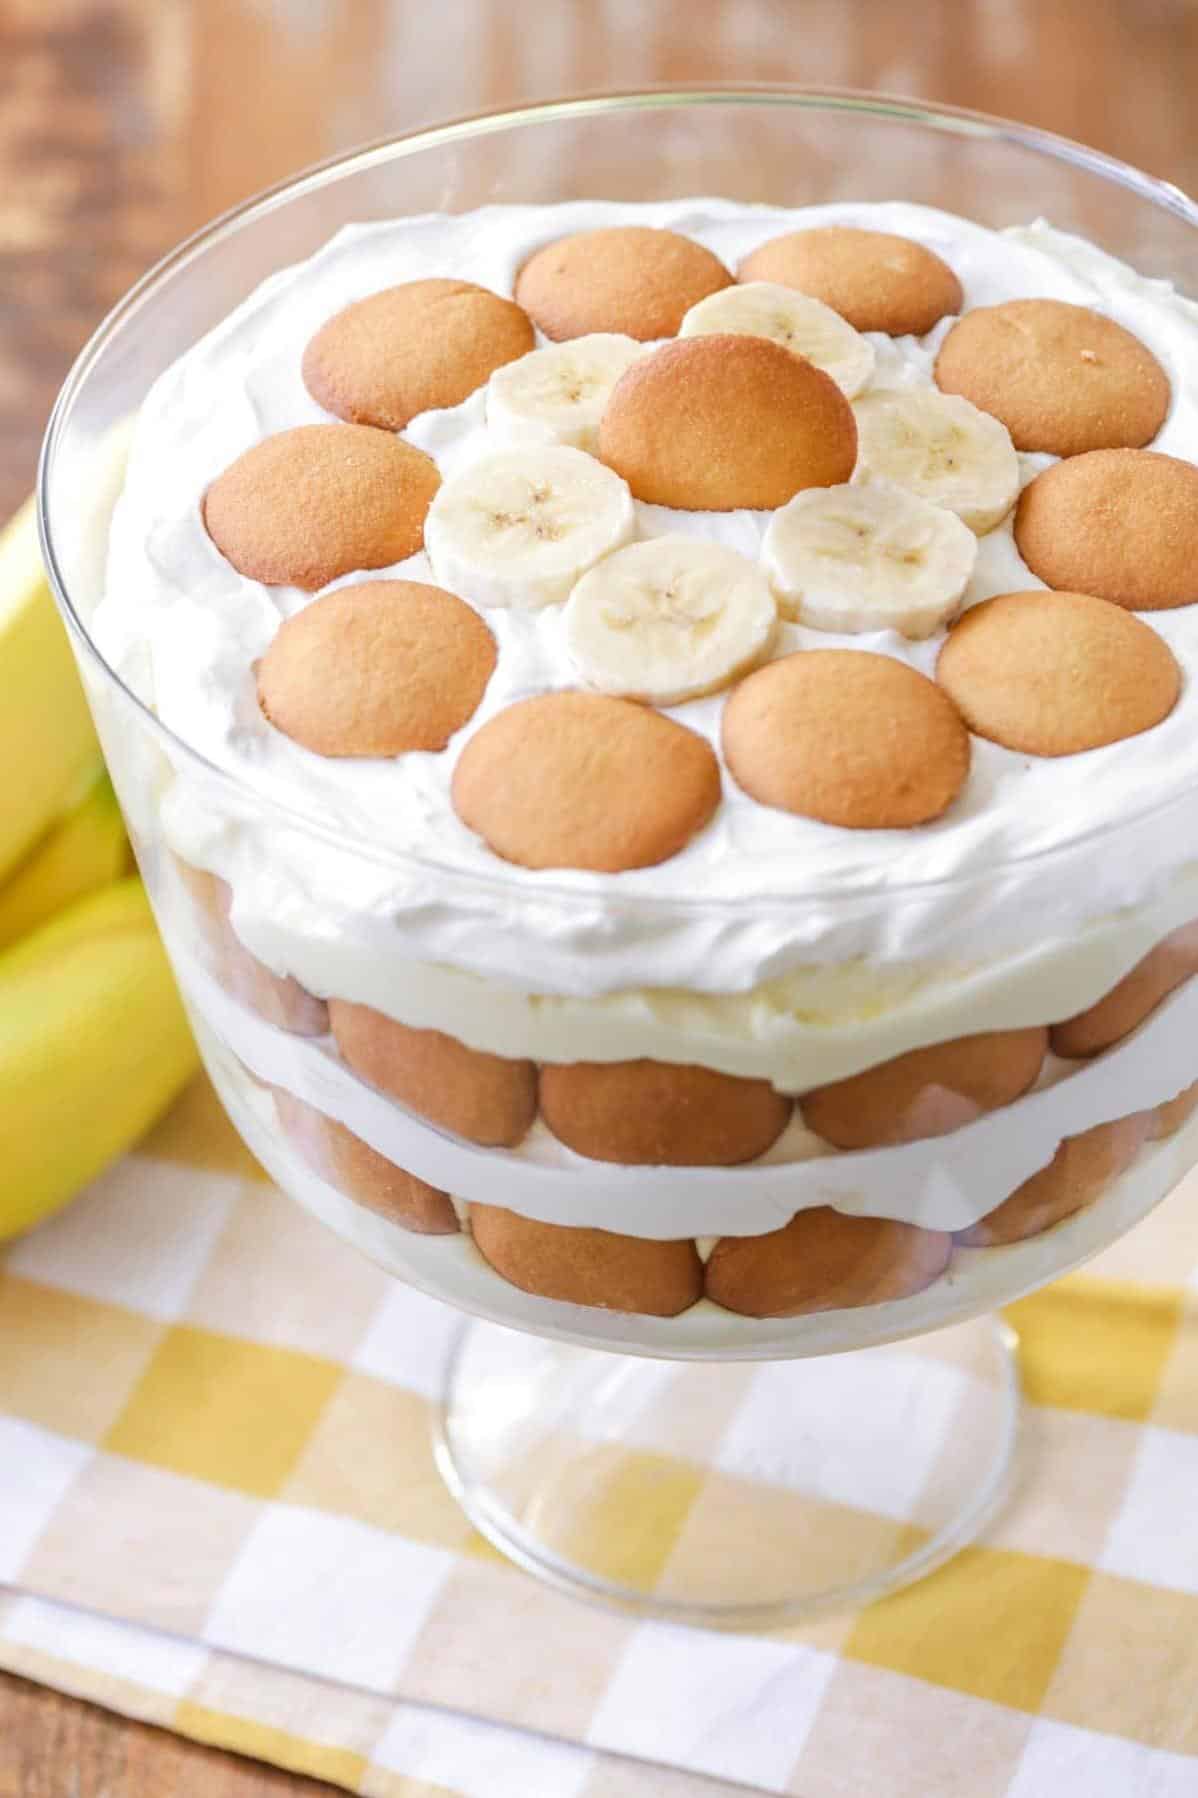 Delicious Banana Wafer Pudding Recipe for Dessert Lovers